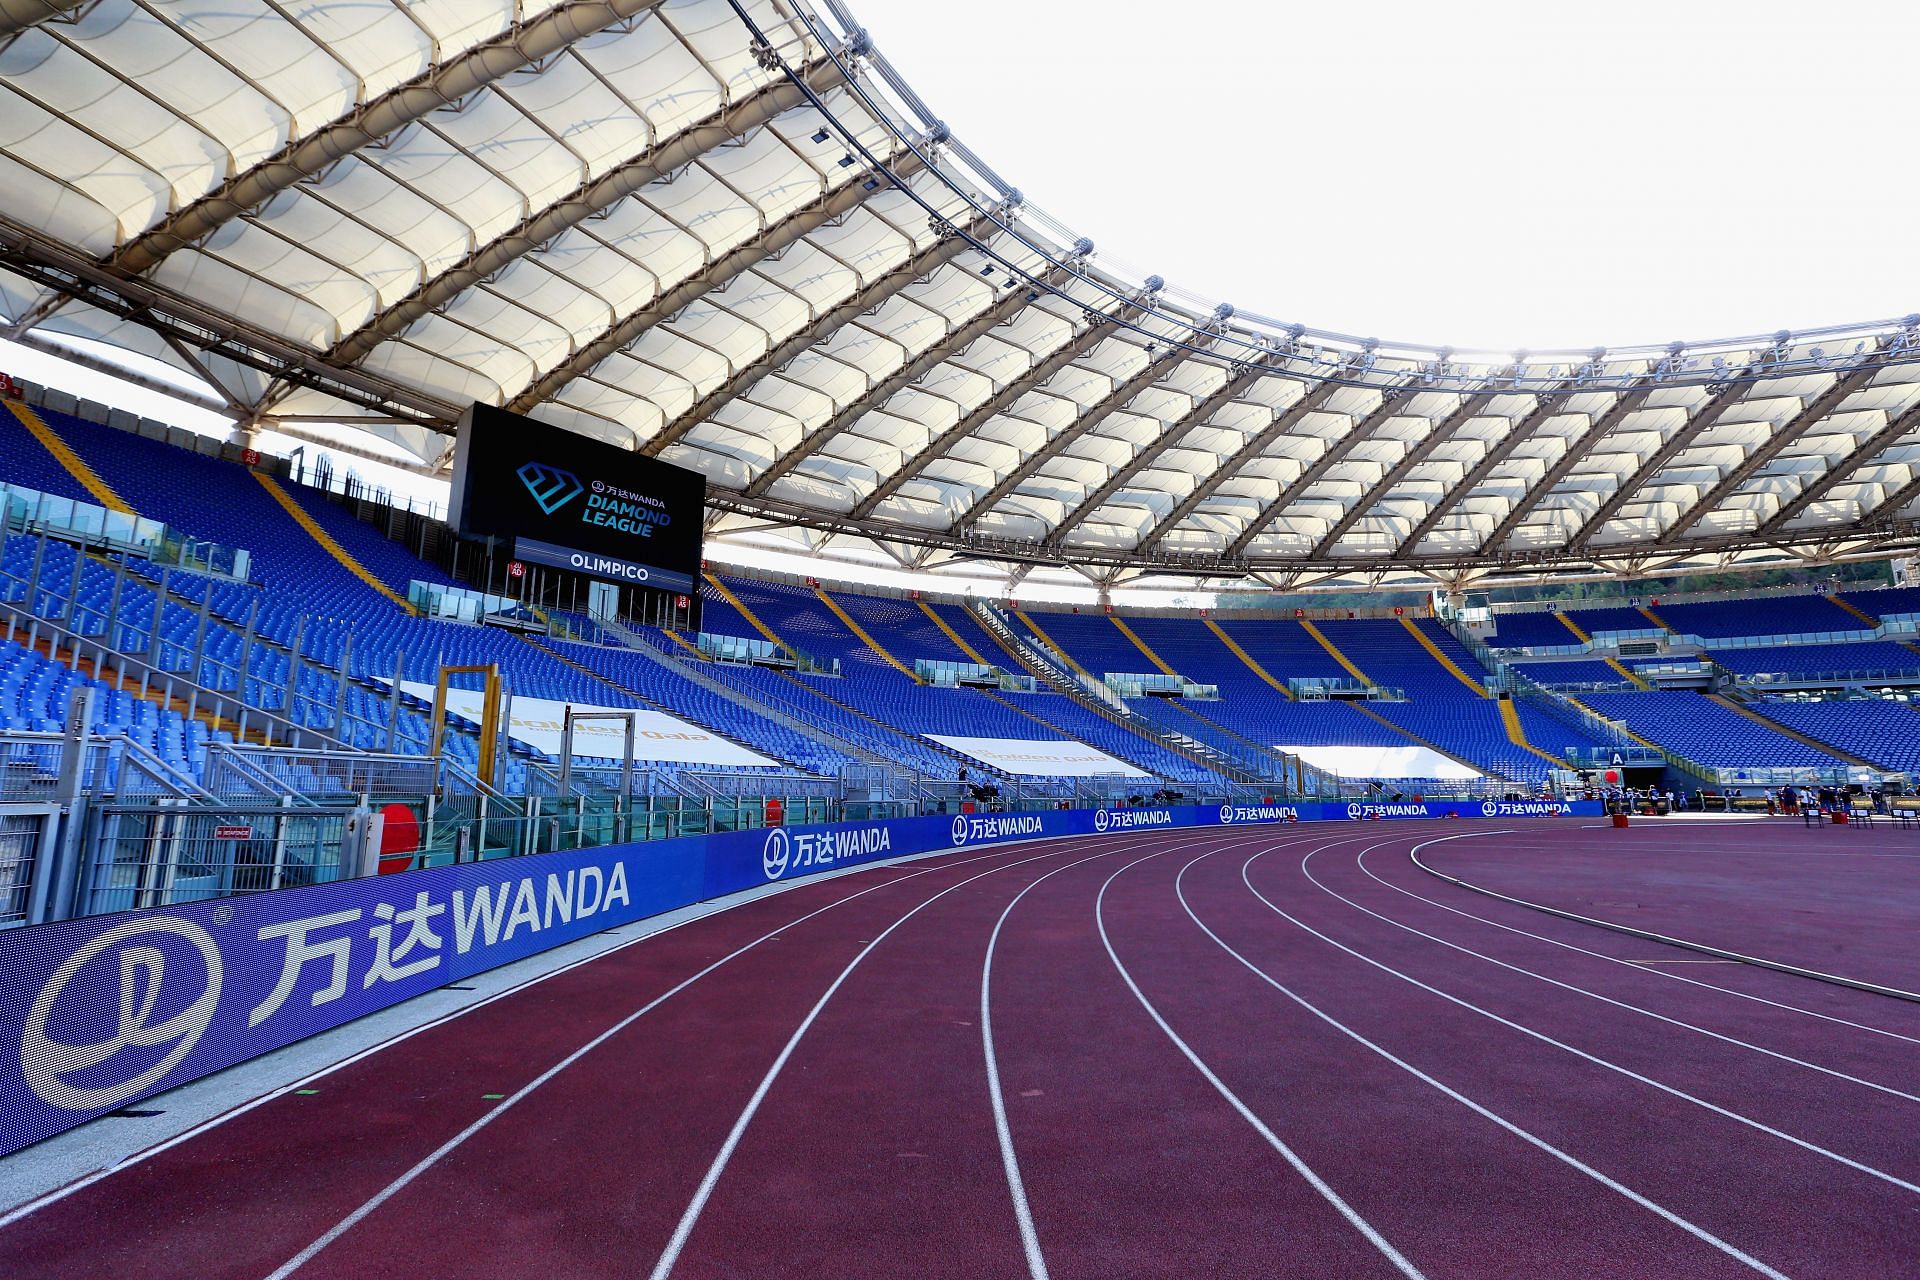 A view of the Rome Olympic Stadium. (PC: Getty Images)